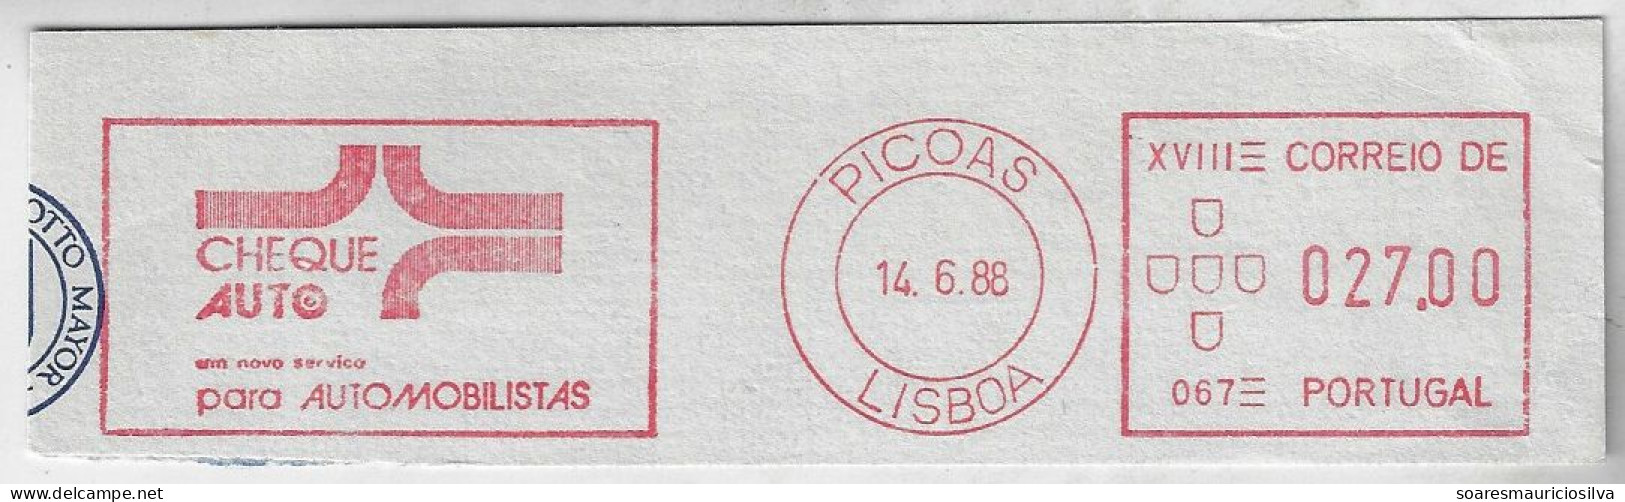 Portugal 1988 Cover Fragment Meter Stamp Hasler Mailmaster Slogan Check Auto A New Service For Motorists Lisbon Picoa - Covers & Documents